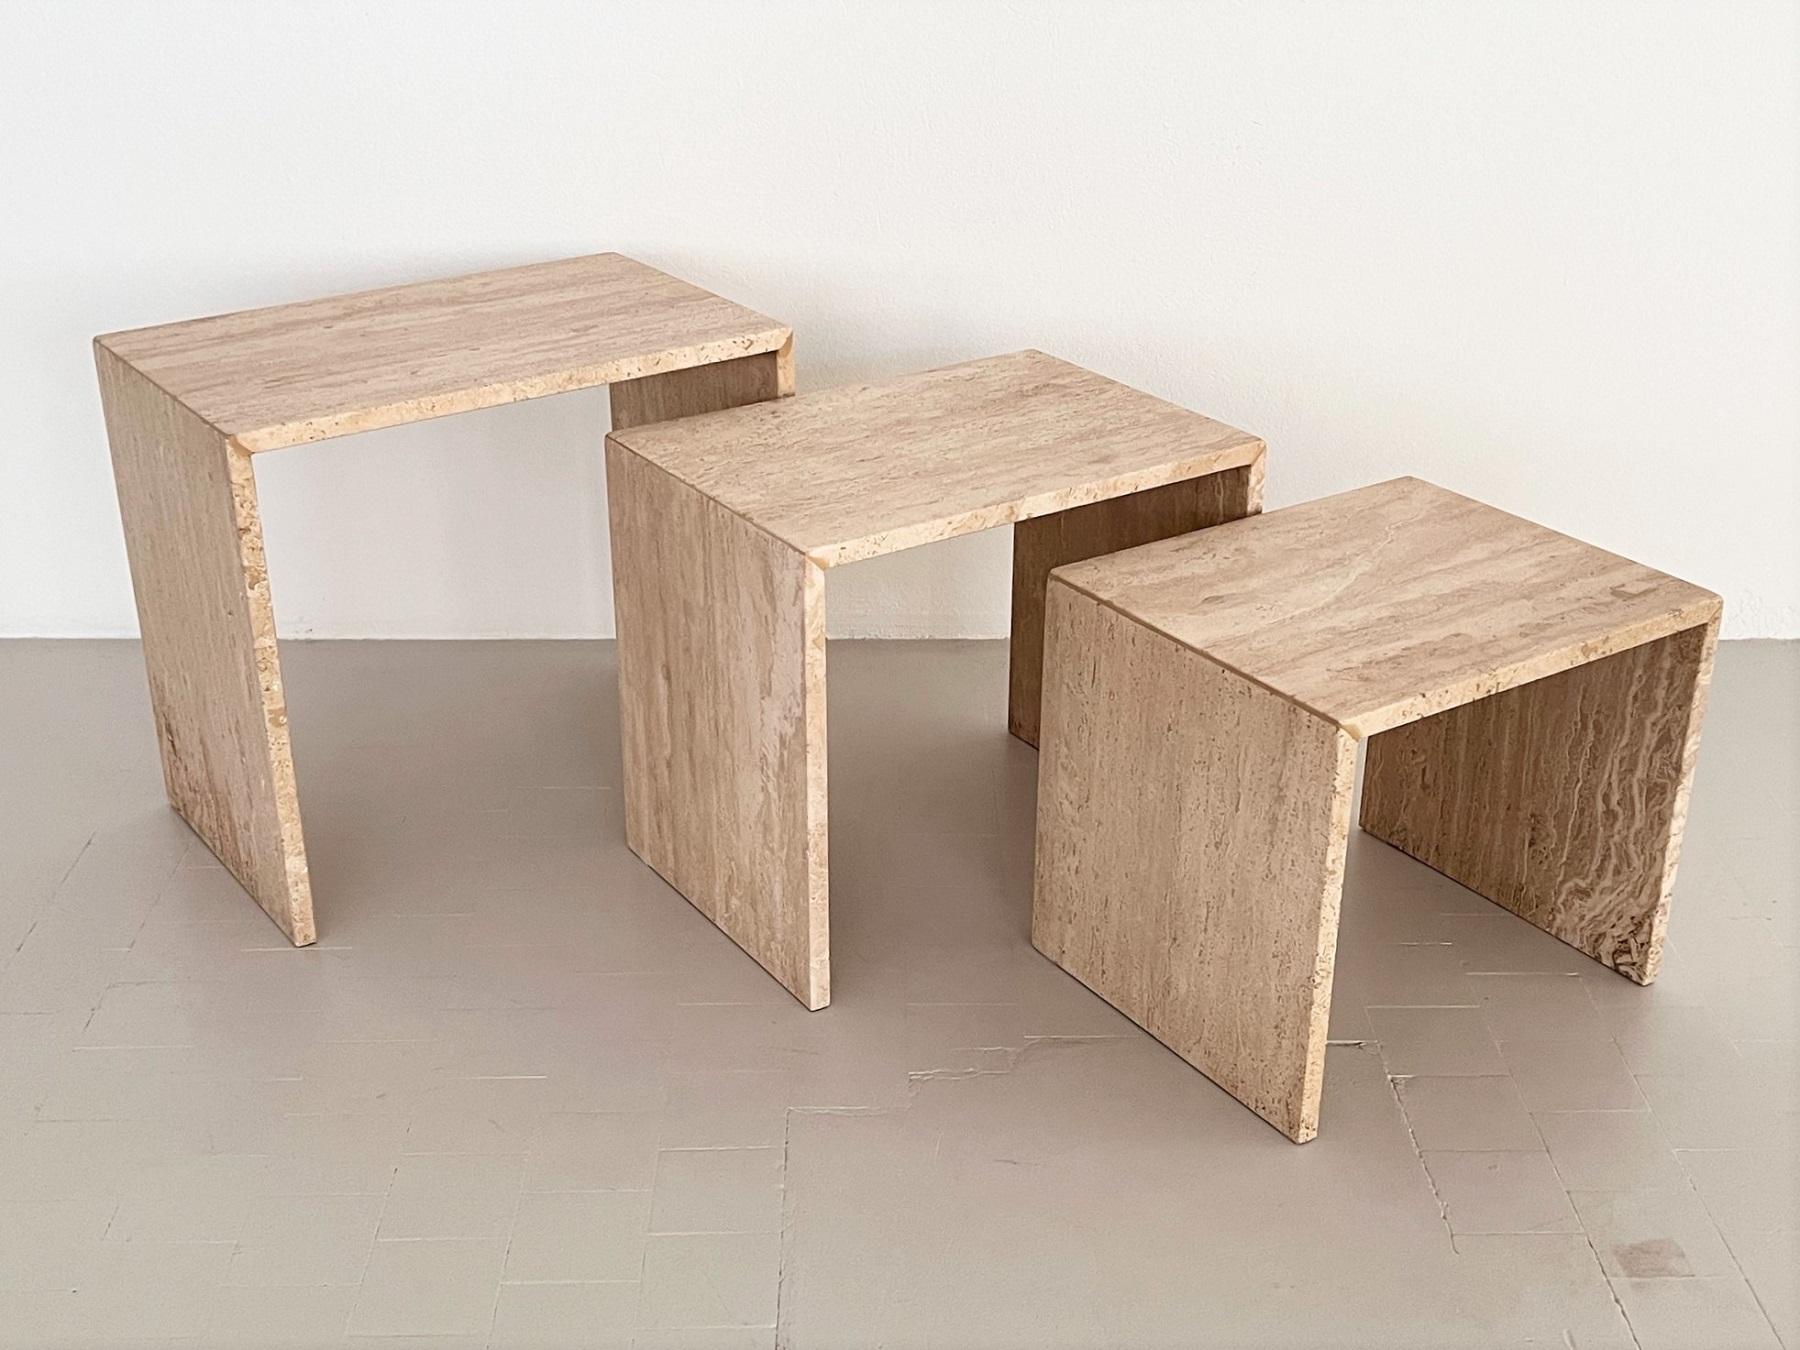 Late 20th Century Nesting Coffee Tables in Travertine Stone from the 1970s, Set of Three For Sale